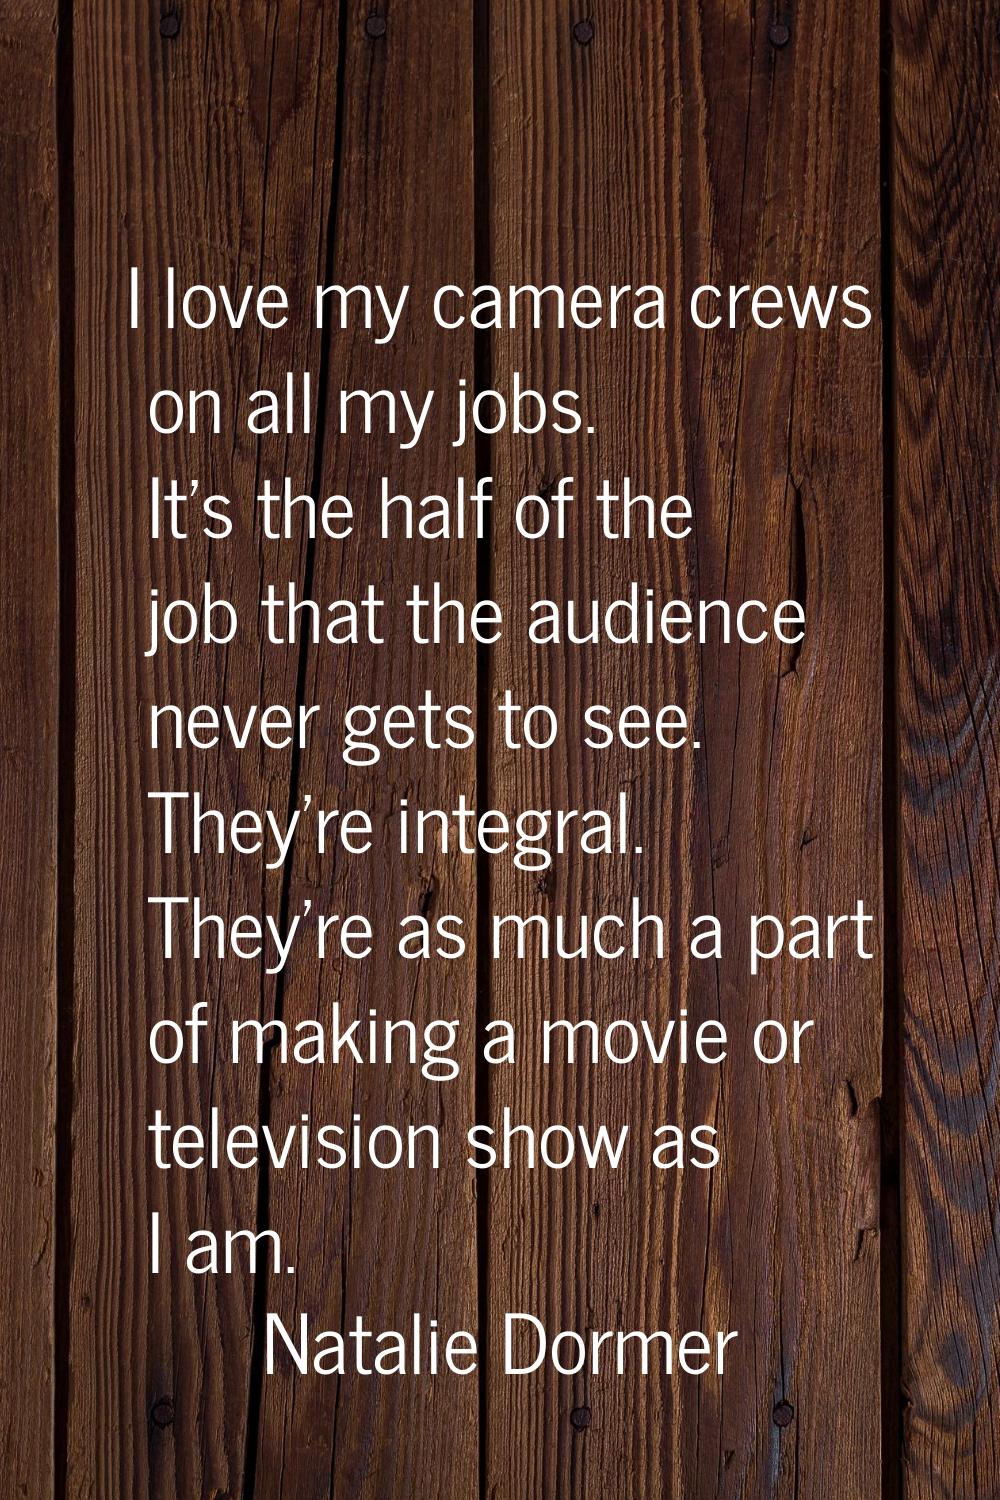 I love my camera crews on all my jobs. It's the half of the job that the audience never gets to see